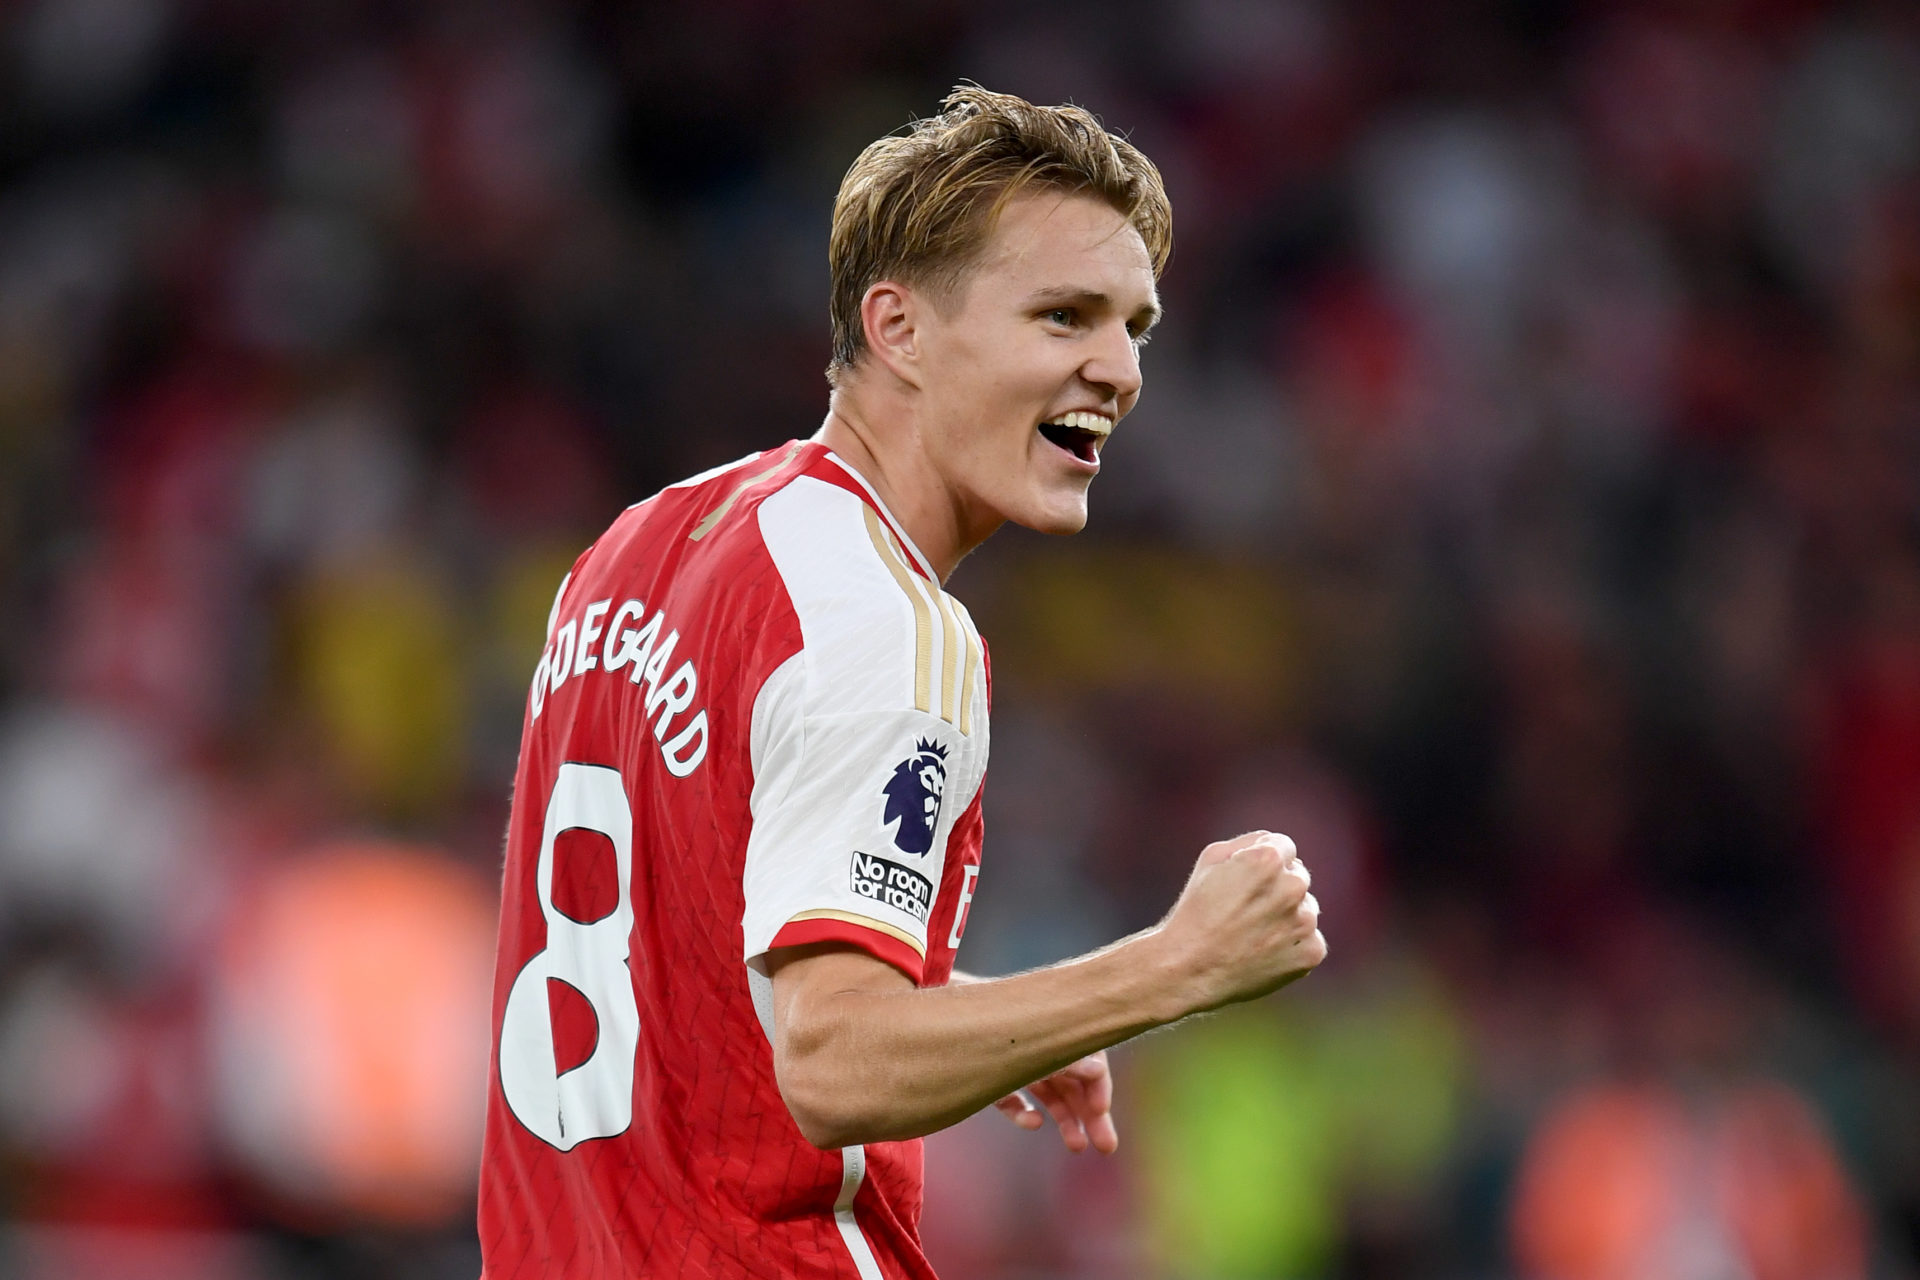 Martin Odegaard now claims 23-year-old PL player is the best in the world